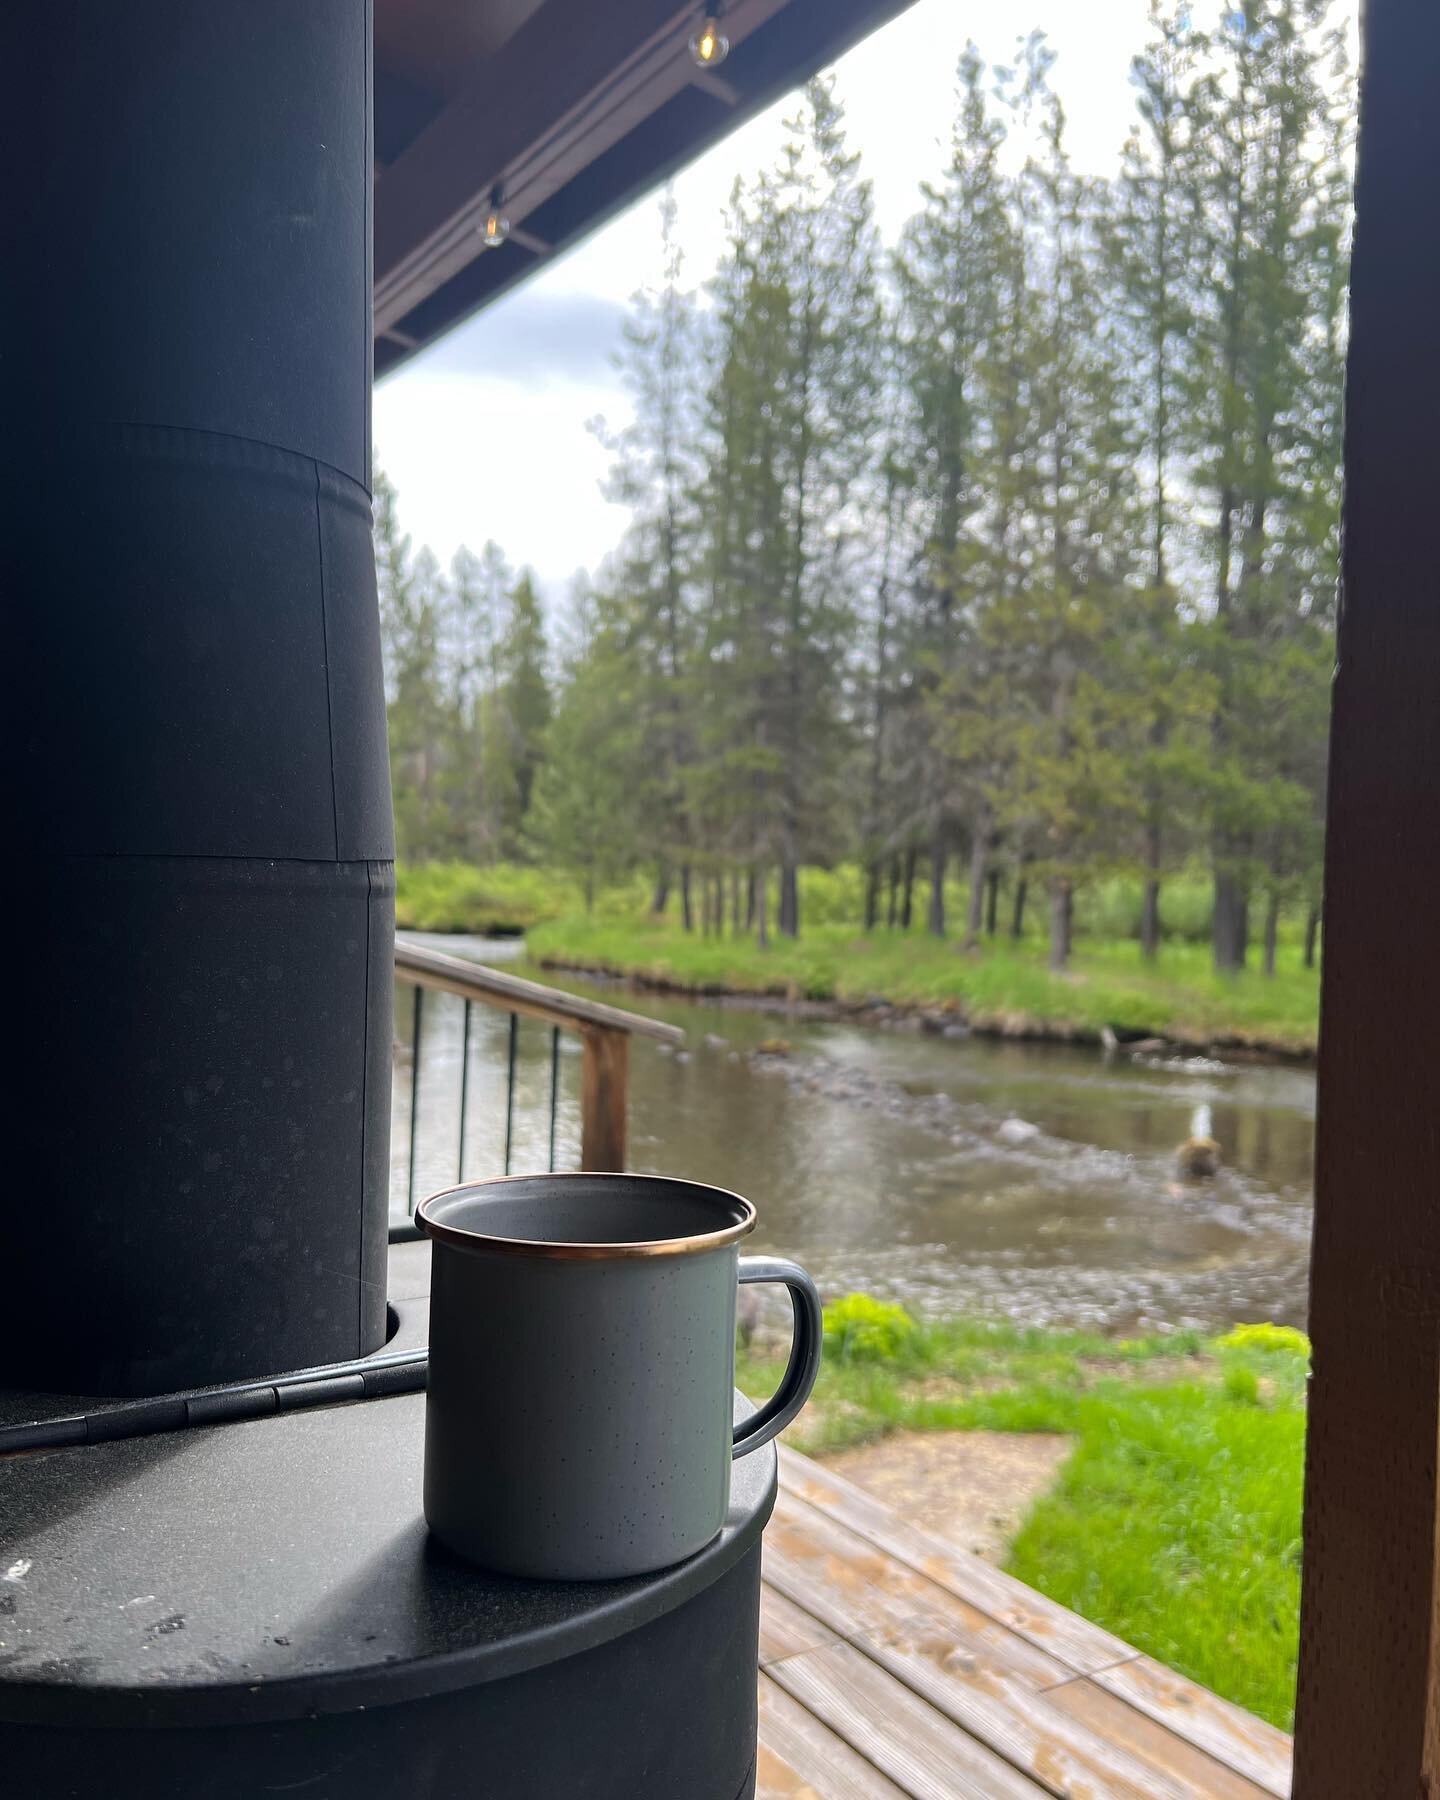 Spring showers are making it green at the Pine Path Cabin
.
.

Weekly rentals in 2022 hosted by&nbsp;@ryndrws
#cabin&nbsp;#cabinlife&nbsp;#cabininthewoods&nbsp;#cabincrew&nbsp;#vacationrental&nbsp;#vacationrentals&nbsp;#oregon&nbsp;#inbend&nbsp;#cres